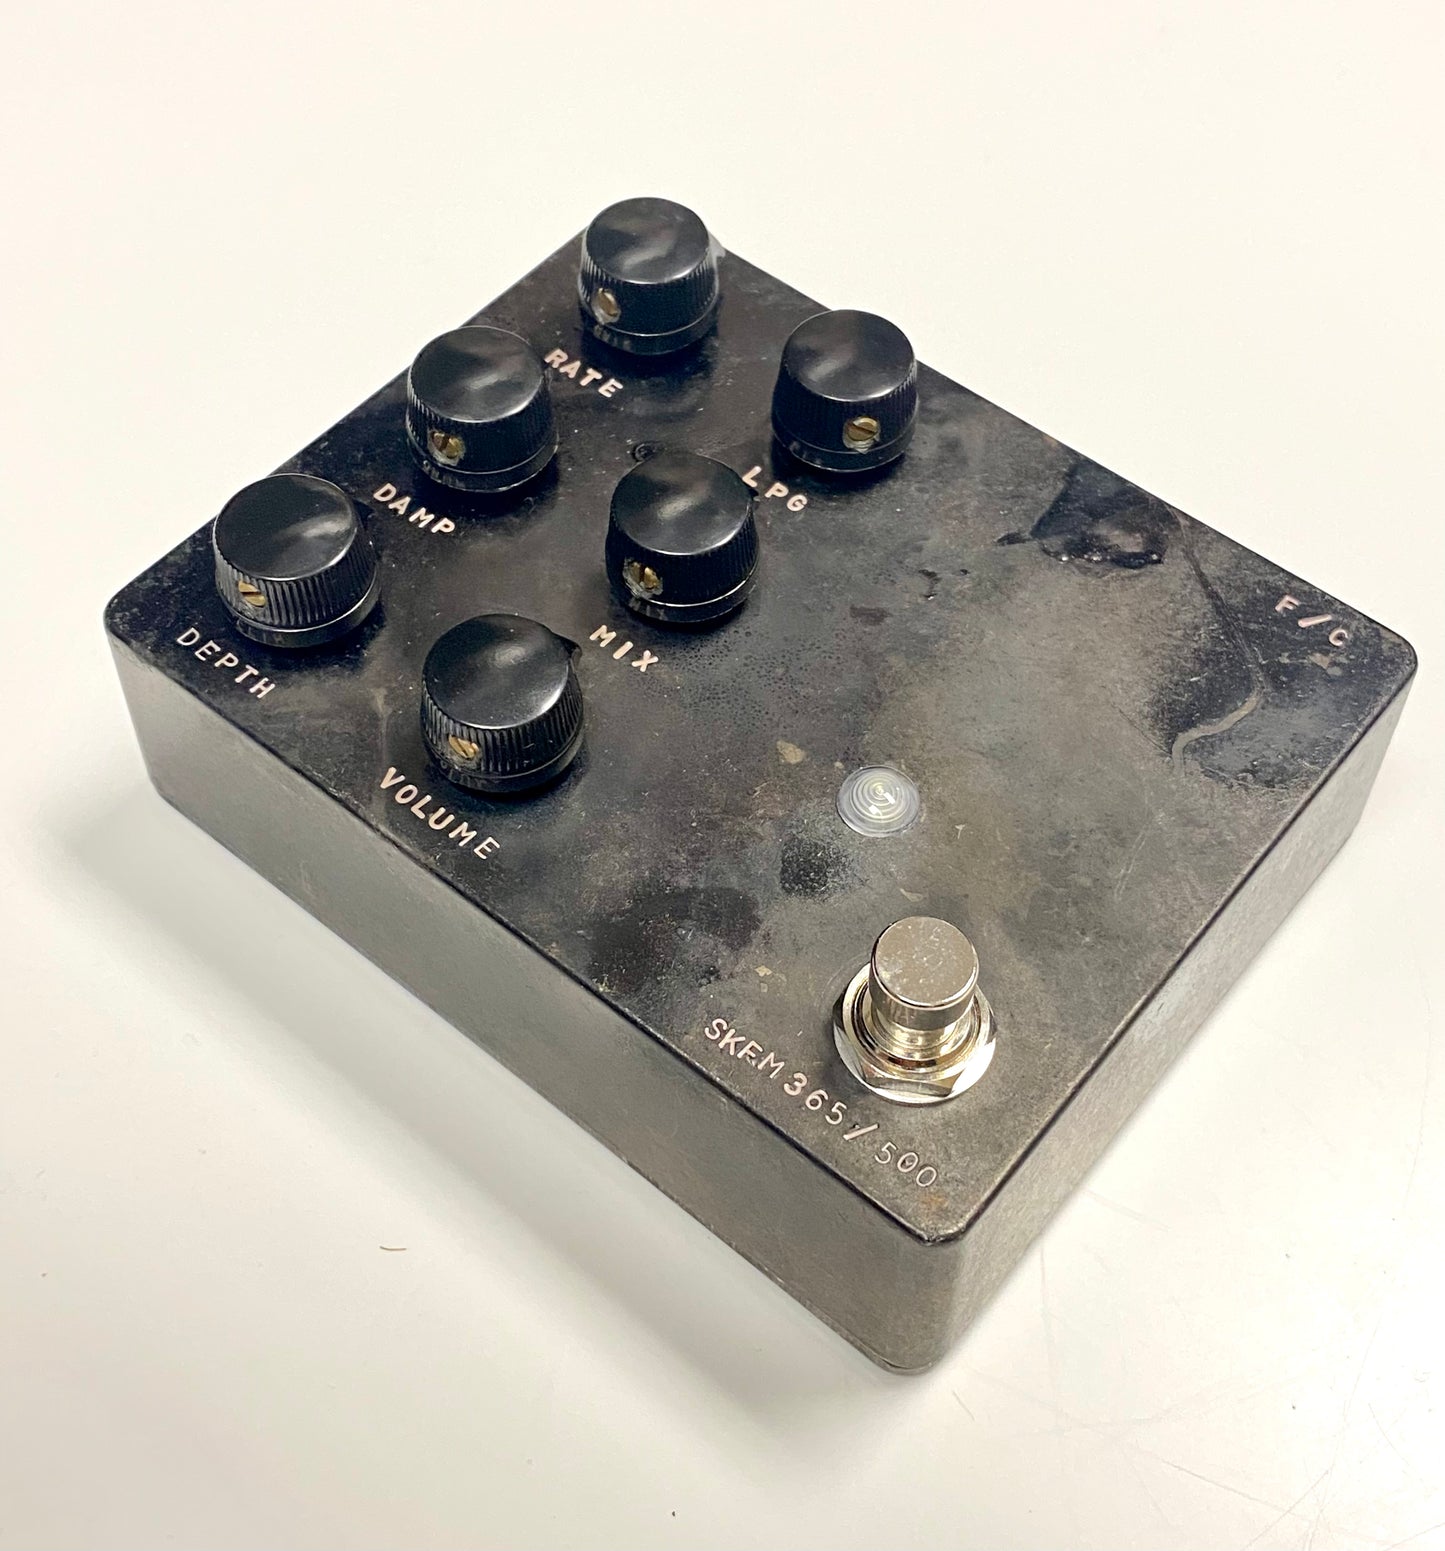 Fairfield Circuitry Shallow Water (Special Edition #365)